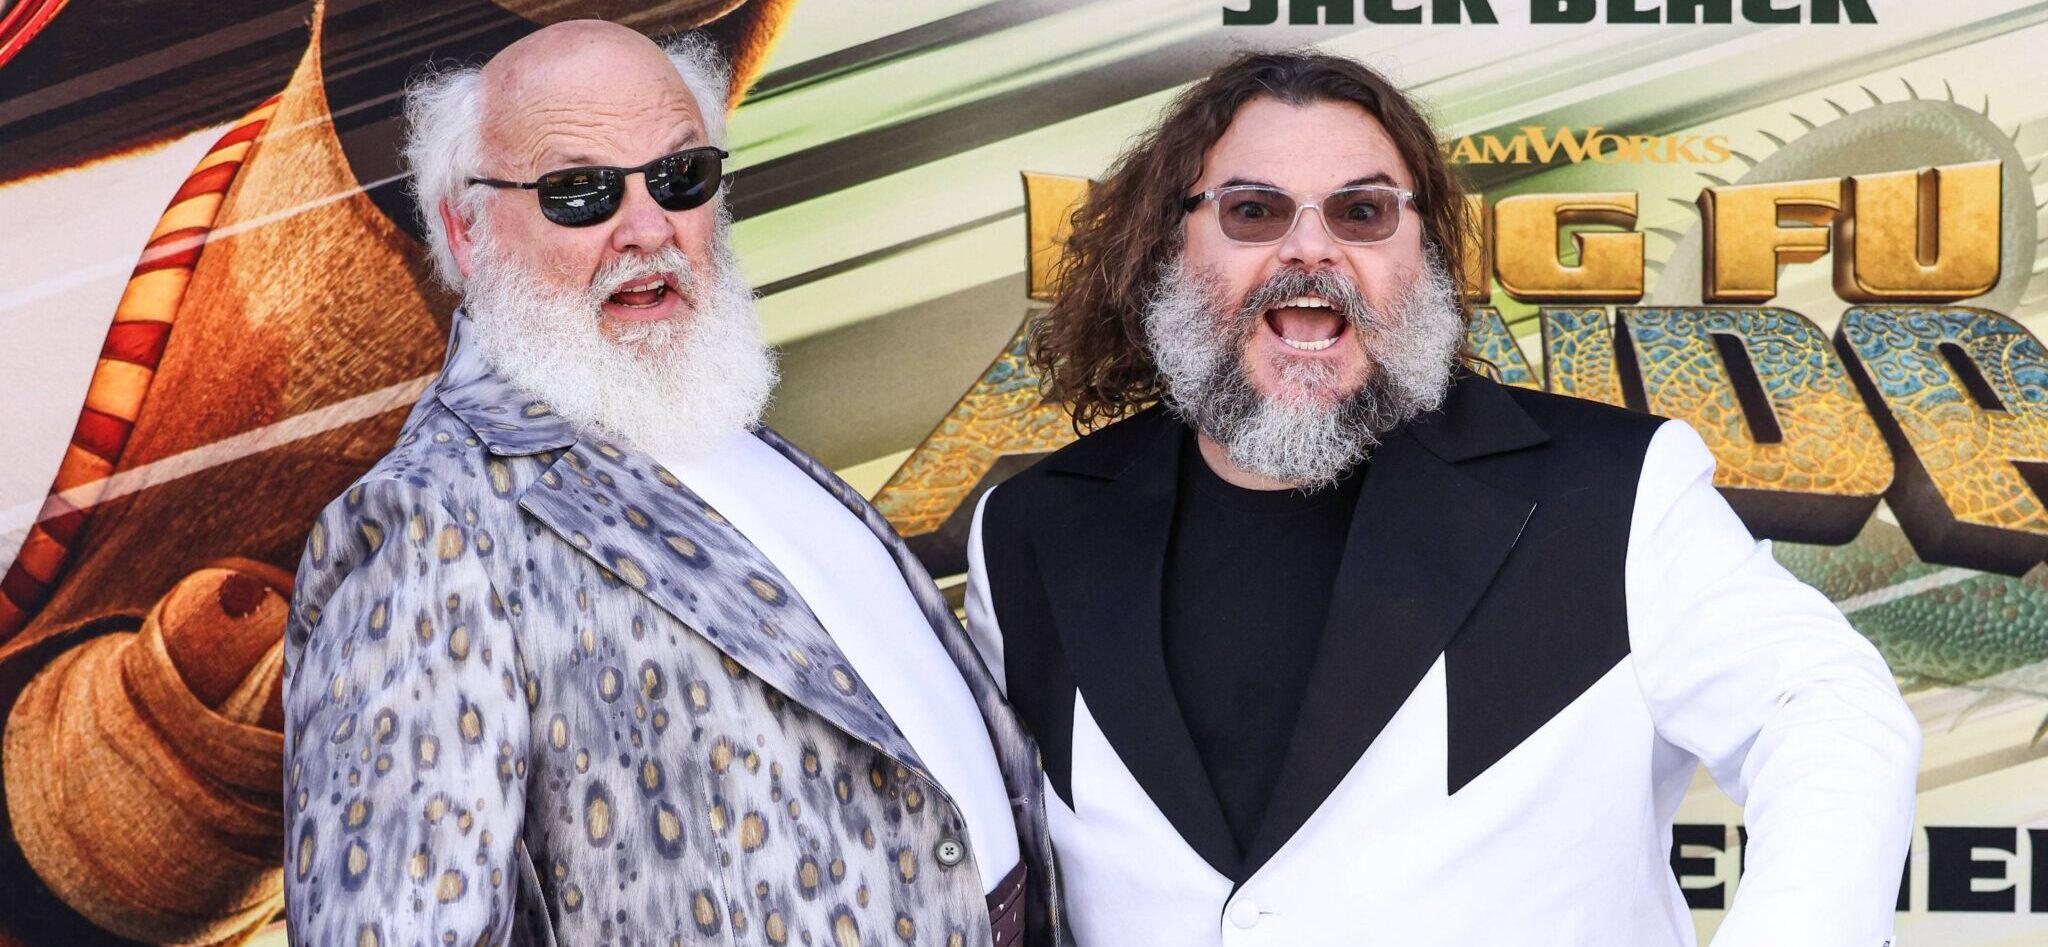 Kyle Gass and Jack Black at World Premiere Of DreamWorks Animation And Universal Pictures' 'Kung Fu Panda 4'